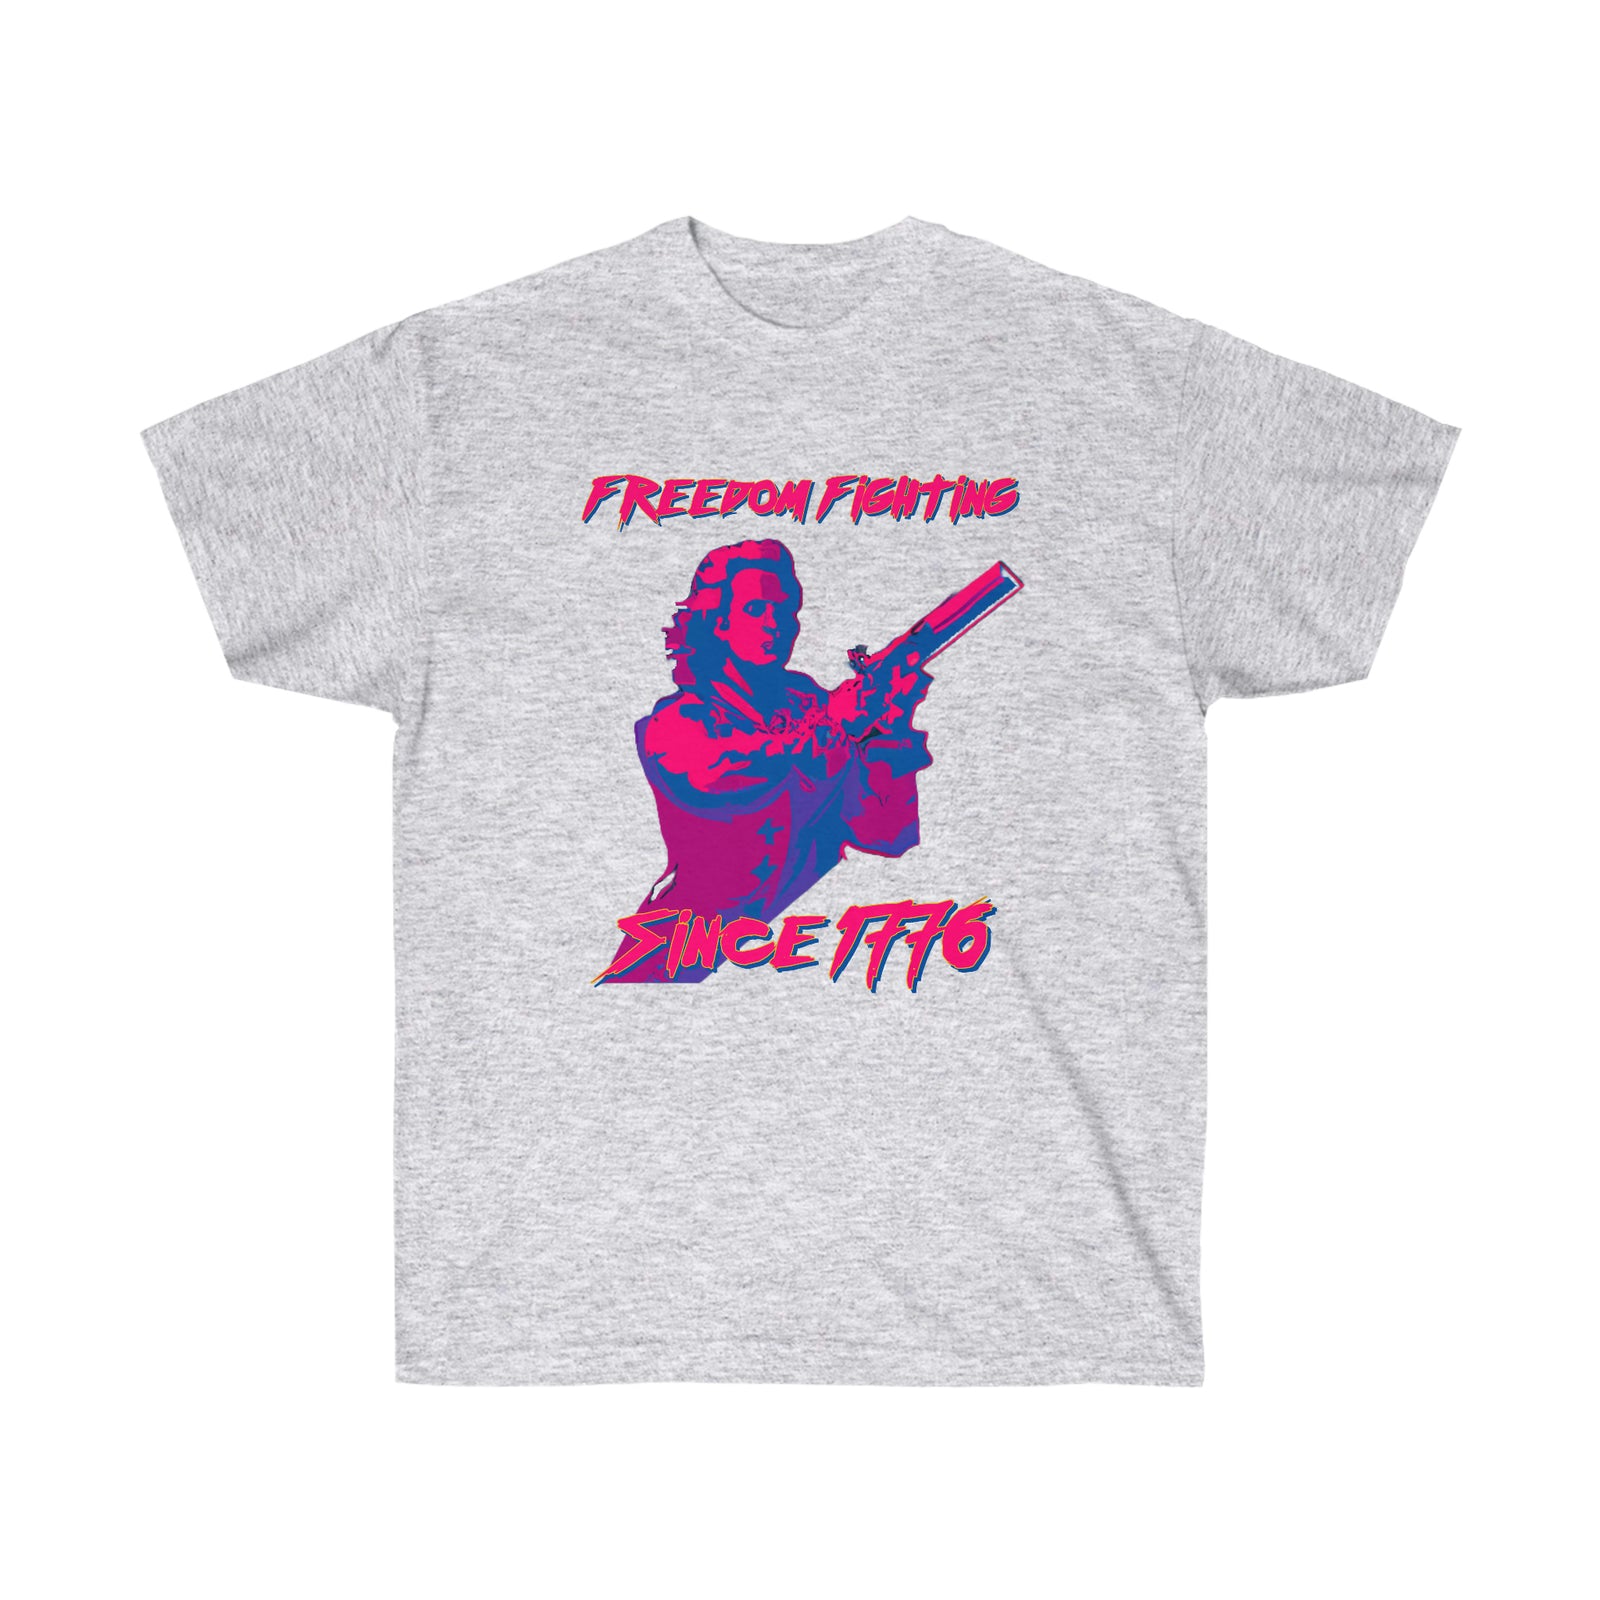 Freedom Fighting Since 1776 Synthwave Tee Shirt